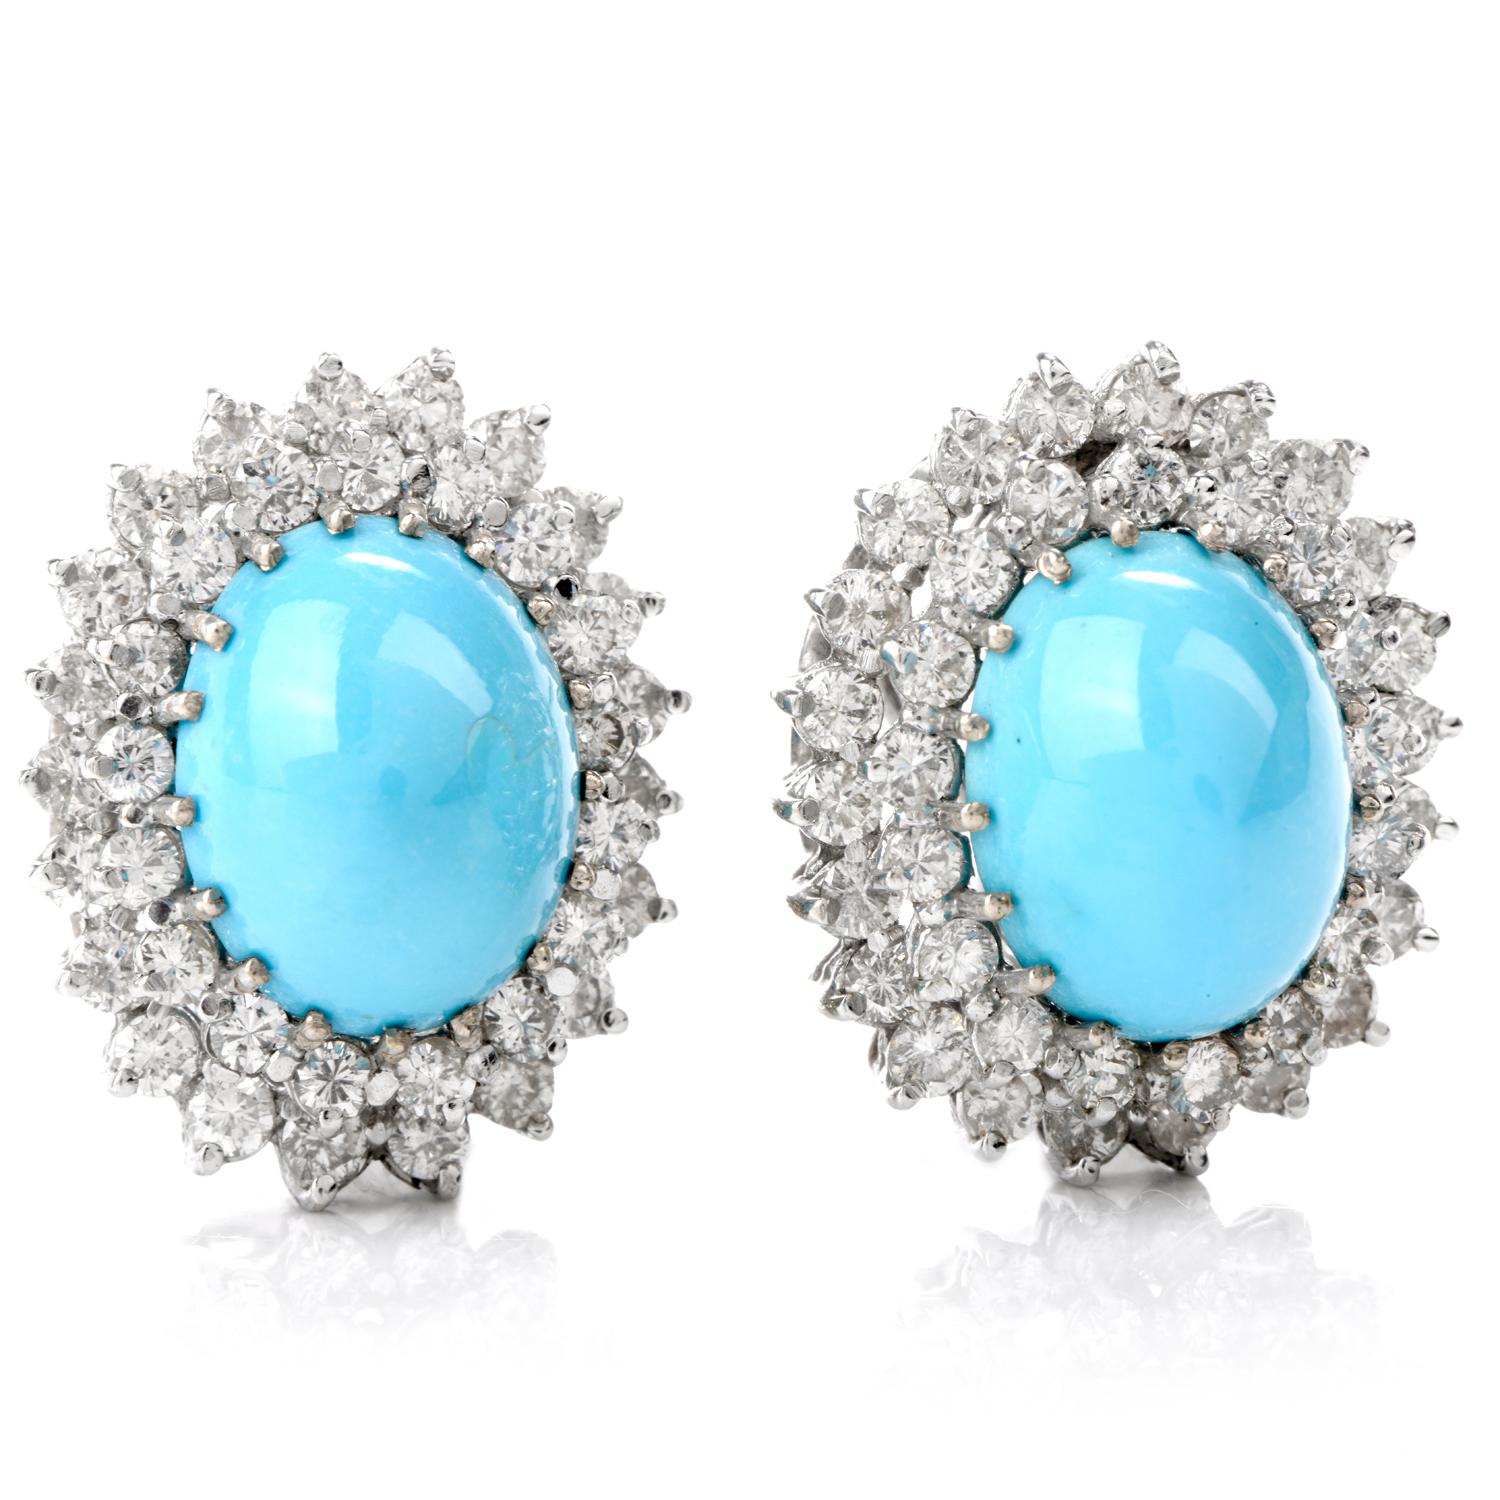 This Vintage 1960's pair of Diamond and Persian Turquoise earrings were inspired with a Double Halo and crafted in 14.0 grams of 14k white gold. The focus and prominent center each contain an oval cabochon cut Turquoise measuring approximately